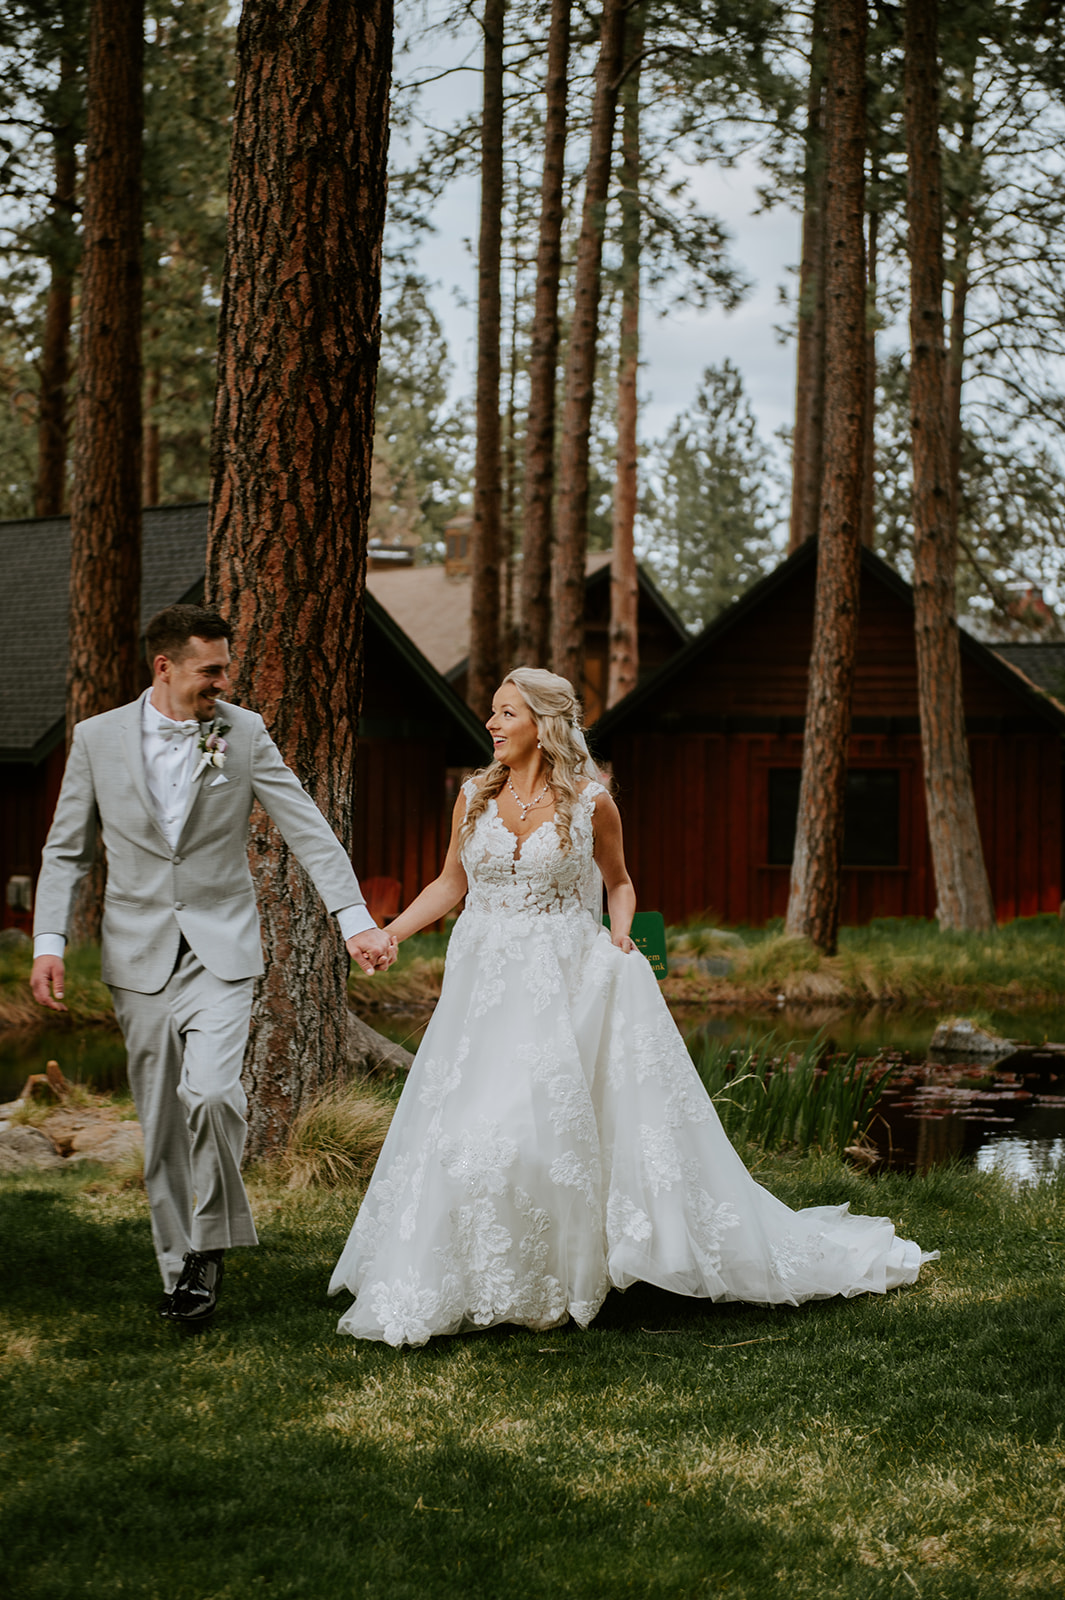 Bride and groom walking together and holding hands in the tall pine trees in sisters oregon